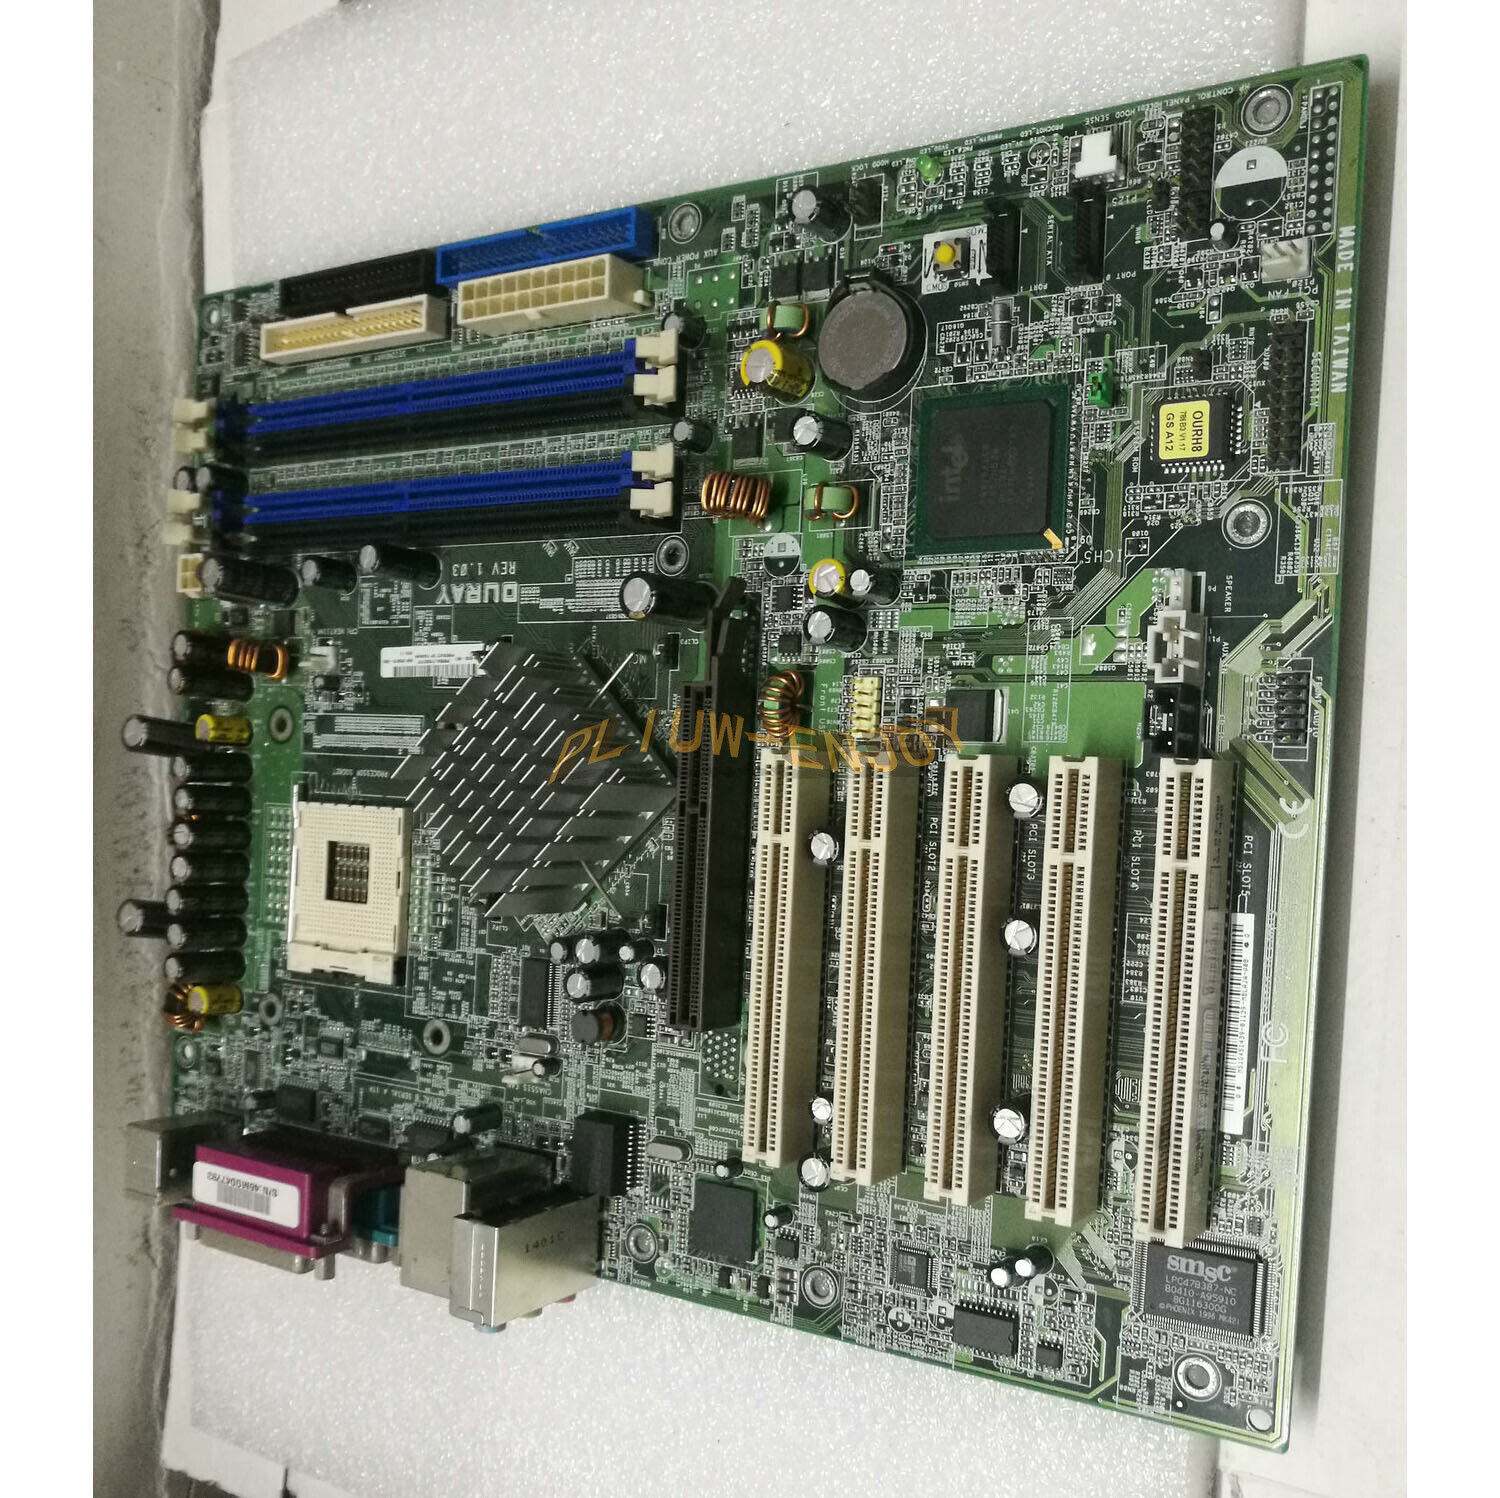 Used 1PCS Main Board 331224-001 361633-001 For XW4100 875PE Workstation